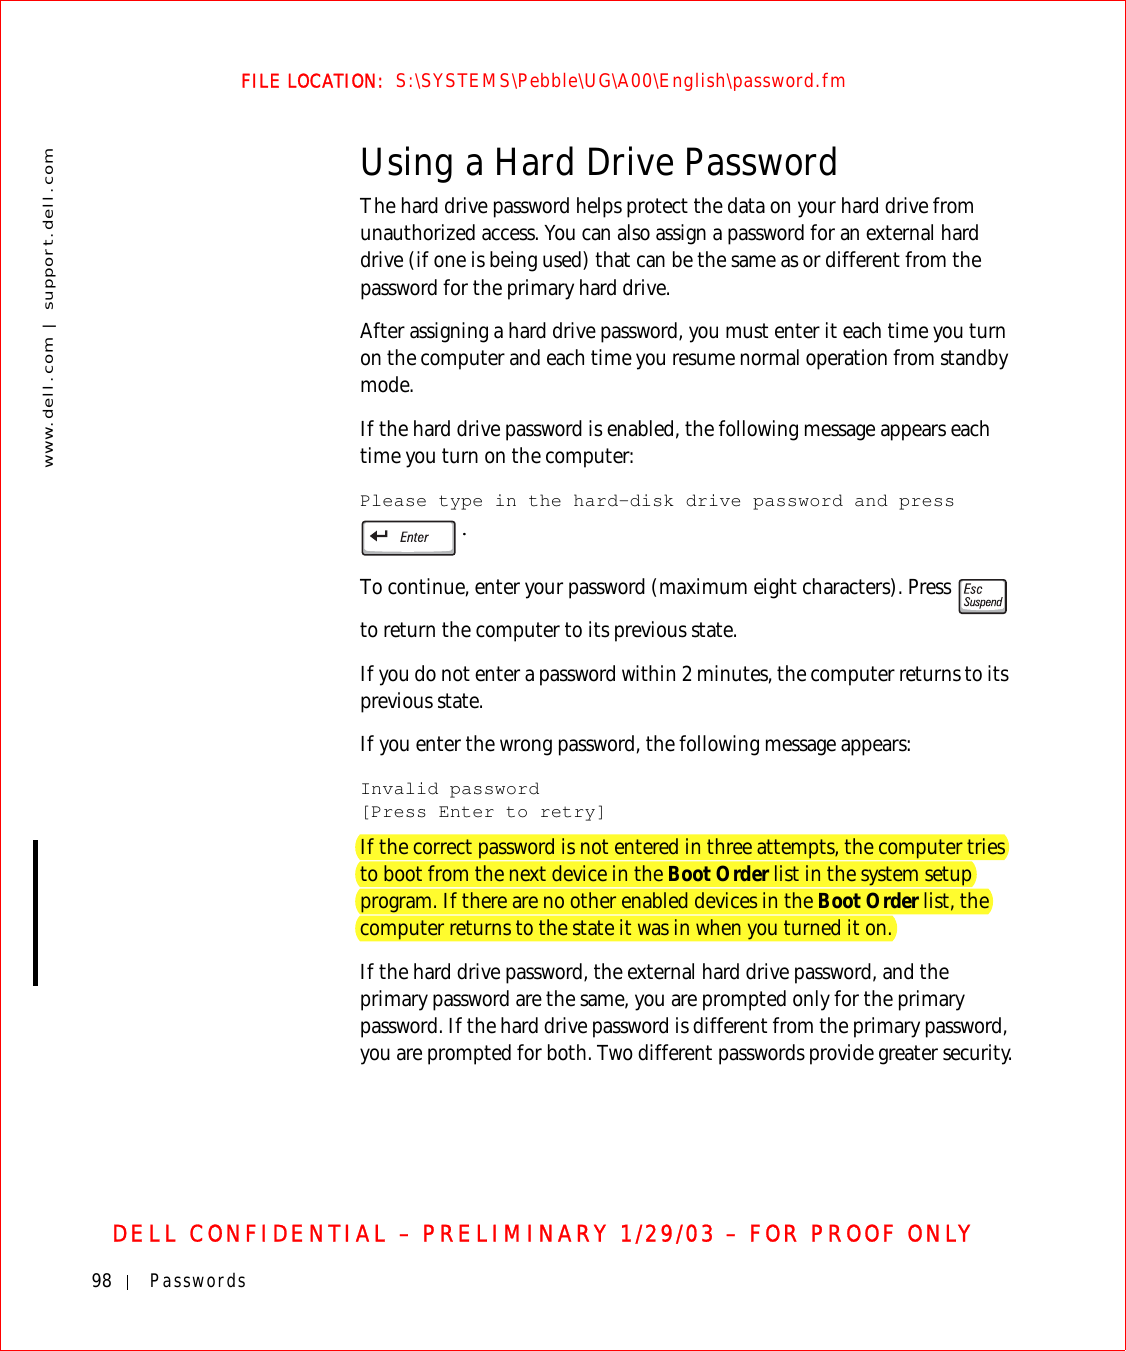 98 Passwordswww.dell.com | support.dell.comFILE LOCATION:  S:\SYSTEMS\Pebble\UG\A00\English\password.fmDELL CONFIDENTIAL – PRELIMINARY 1/29/03 – FOR PROOF ONLYUsing a Hard Drive PasswordThe hard drive password helps protect the data on your hard drive from unauthorized access. You can also assign a password for an external hard drive (if one is being used) that can be the same as or different from the password for the primary hard drive.After assigning a hard drive password, you must enter it each time you turn on the computer and each time you resume normal operation from standby mode.If the hard drive password is enabled, the following message appears each time you turn on the computer:Please type in the hard-disk drive password and press .To continue, enter your password (maximum eight characters). Press   to return the computer to its previous state.If you do not enter a password within 2 minutes, the computer returns to its previous state.If you enter the wrong password, the following message appears:Invalid password[Press Enter to retry]If the correct password is not entered in three attempts, the computer tries to boot from the next device in the Boot Order list in the system setup program. If there are no other enabled devices in the Boot Order list, the computer returns to the state it was in when you turned it on.If the hard drive password, the external hard drive password, and the primary password are the same, you are prompted only for the primary password. If the hard drive password is different from the primary password, you are prompted for both. Two different passwords provide greater security.